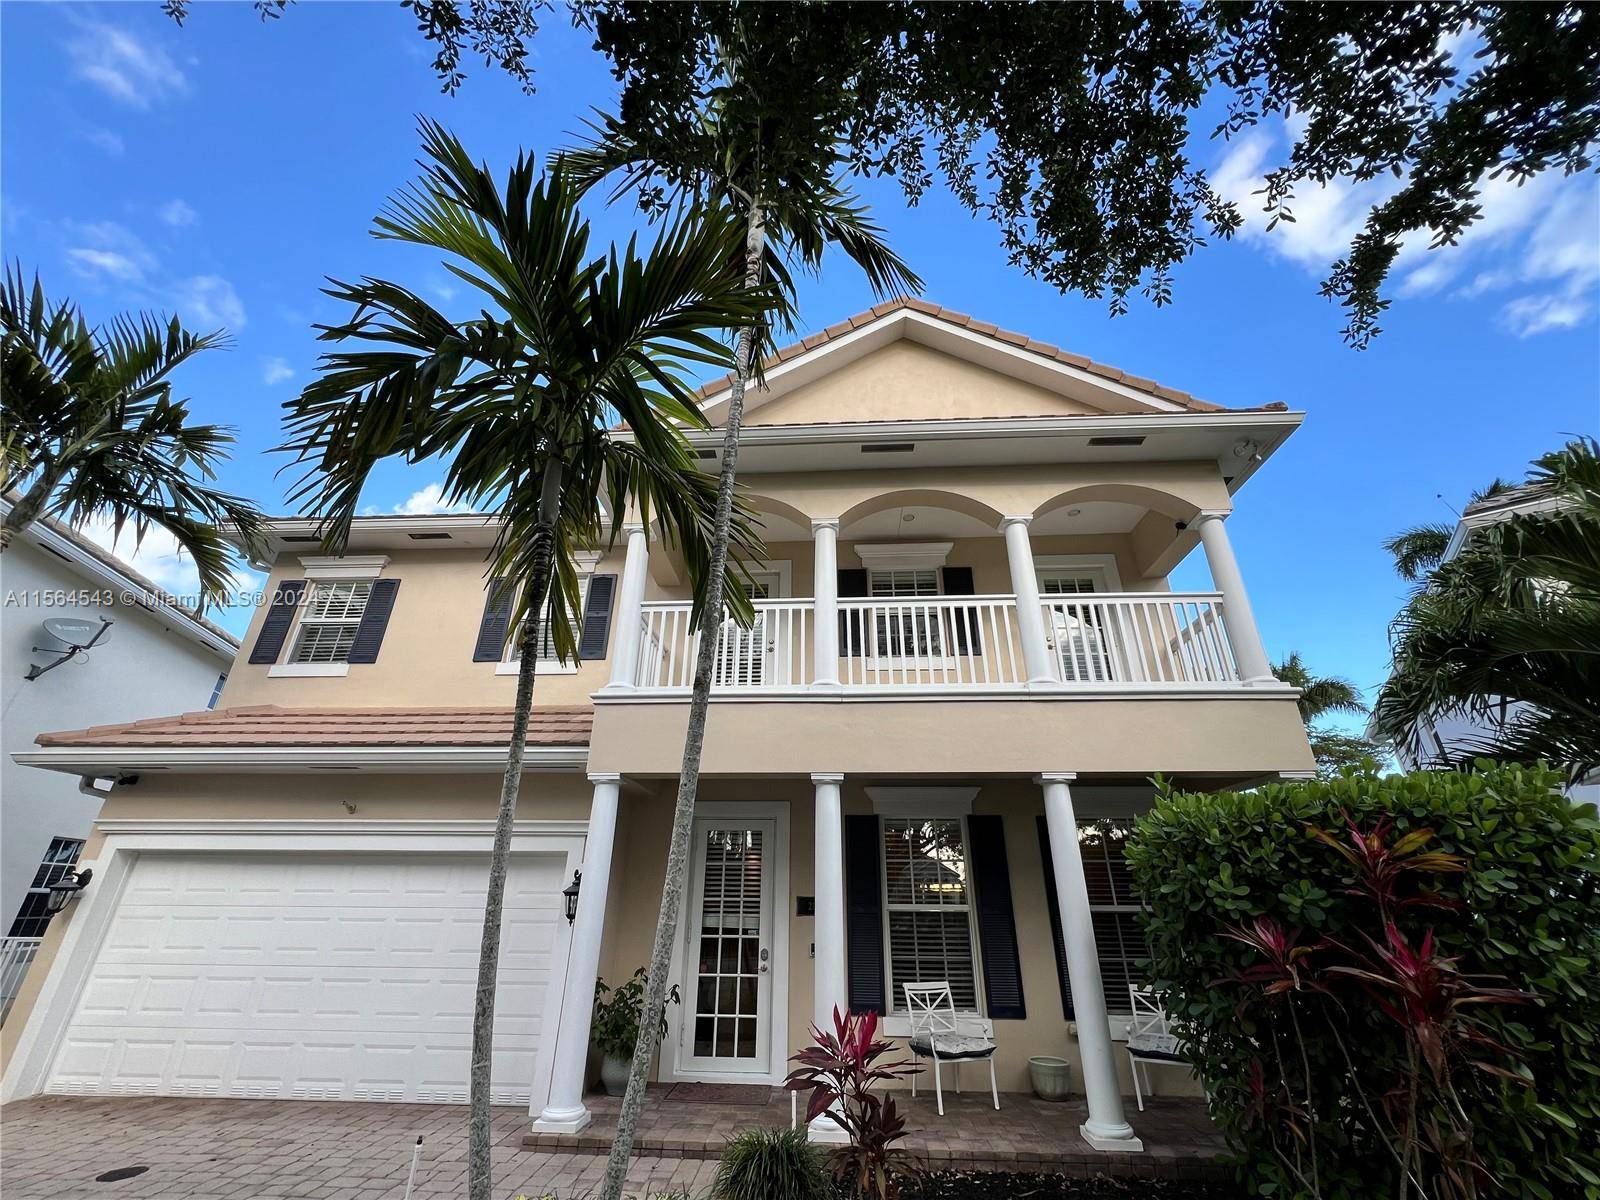 Stunning Two Story Georgian Style home located in La Preserve, a private gated community in East Fort Lauderdale.